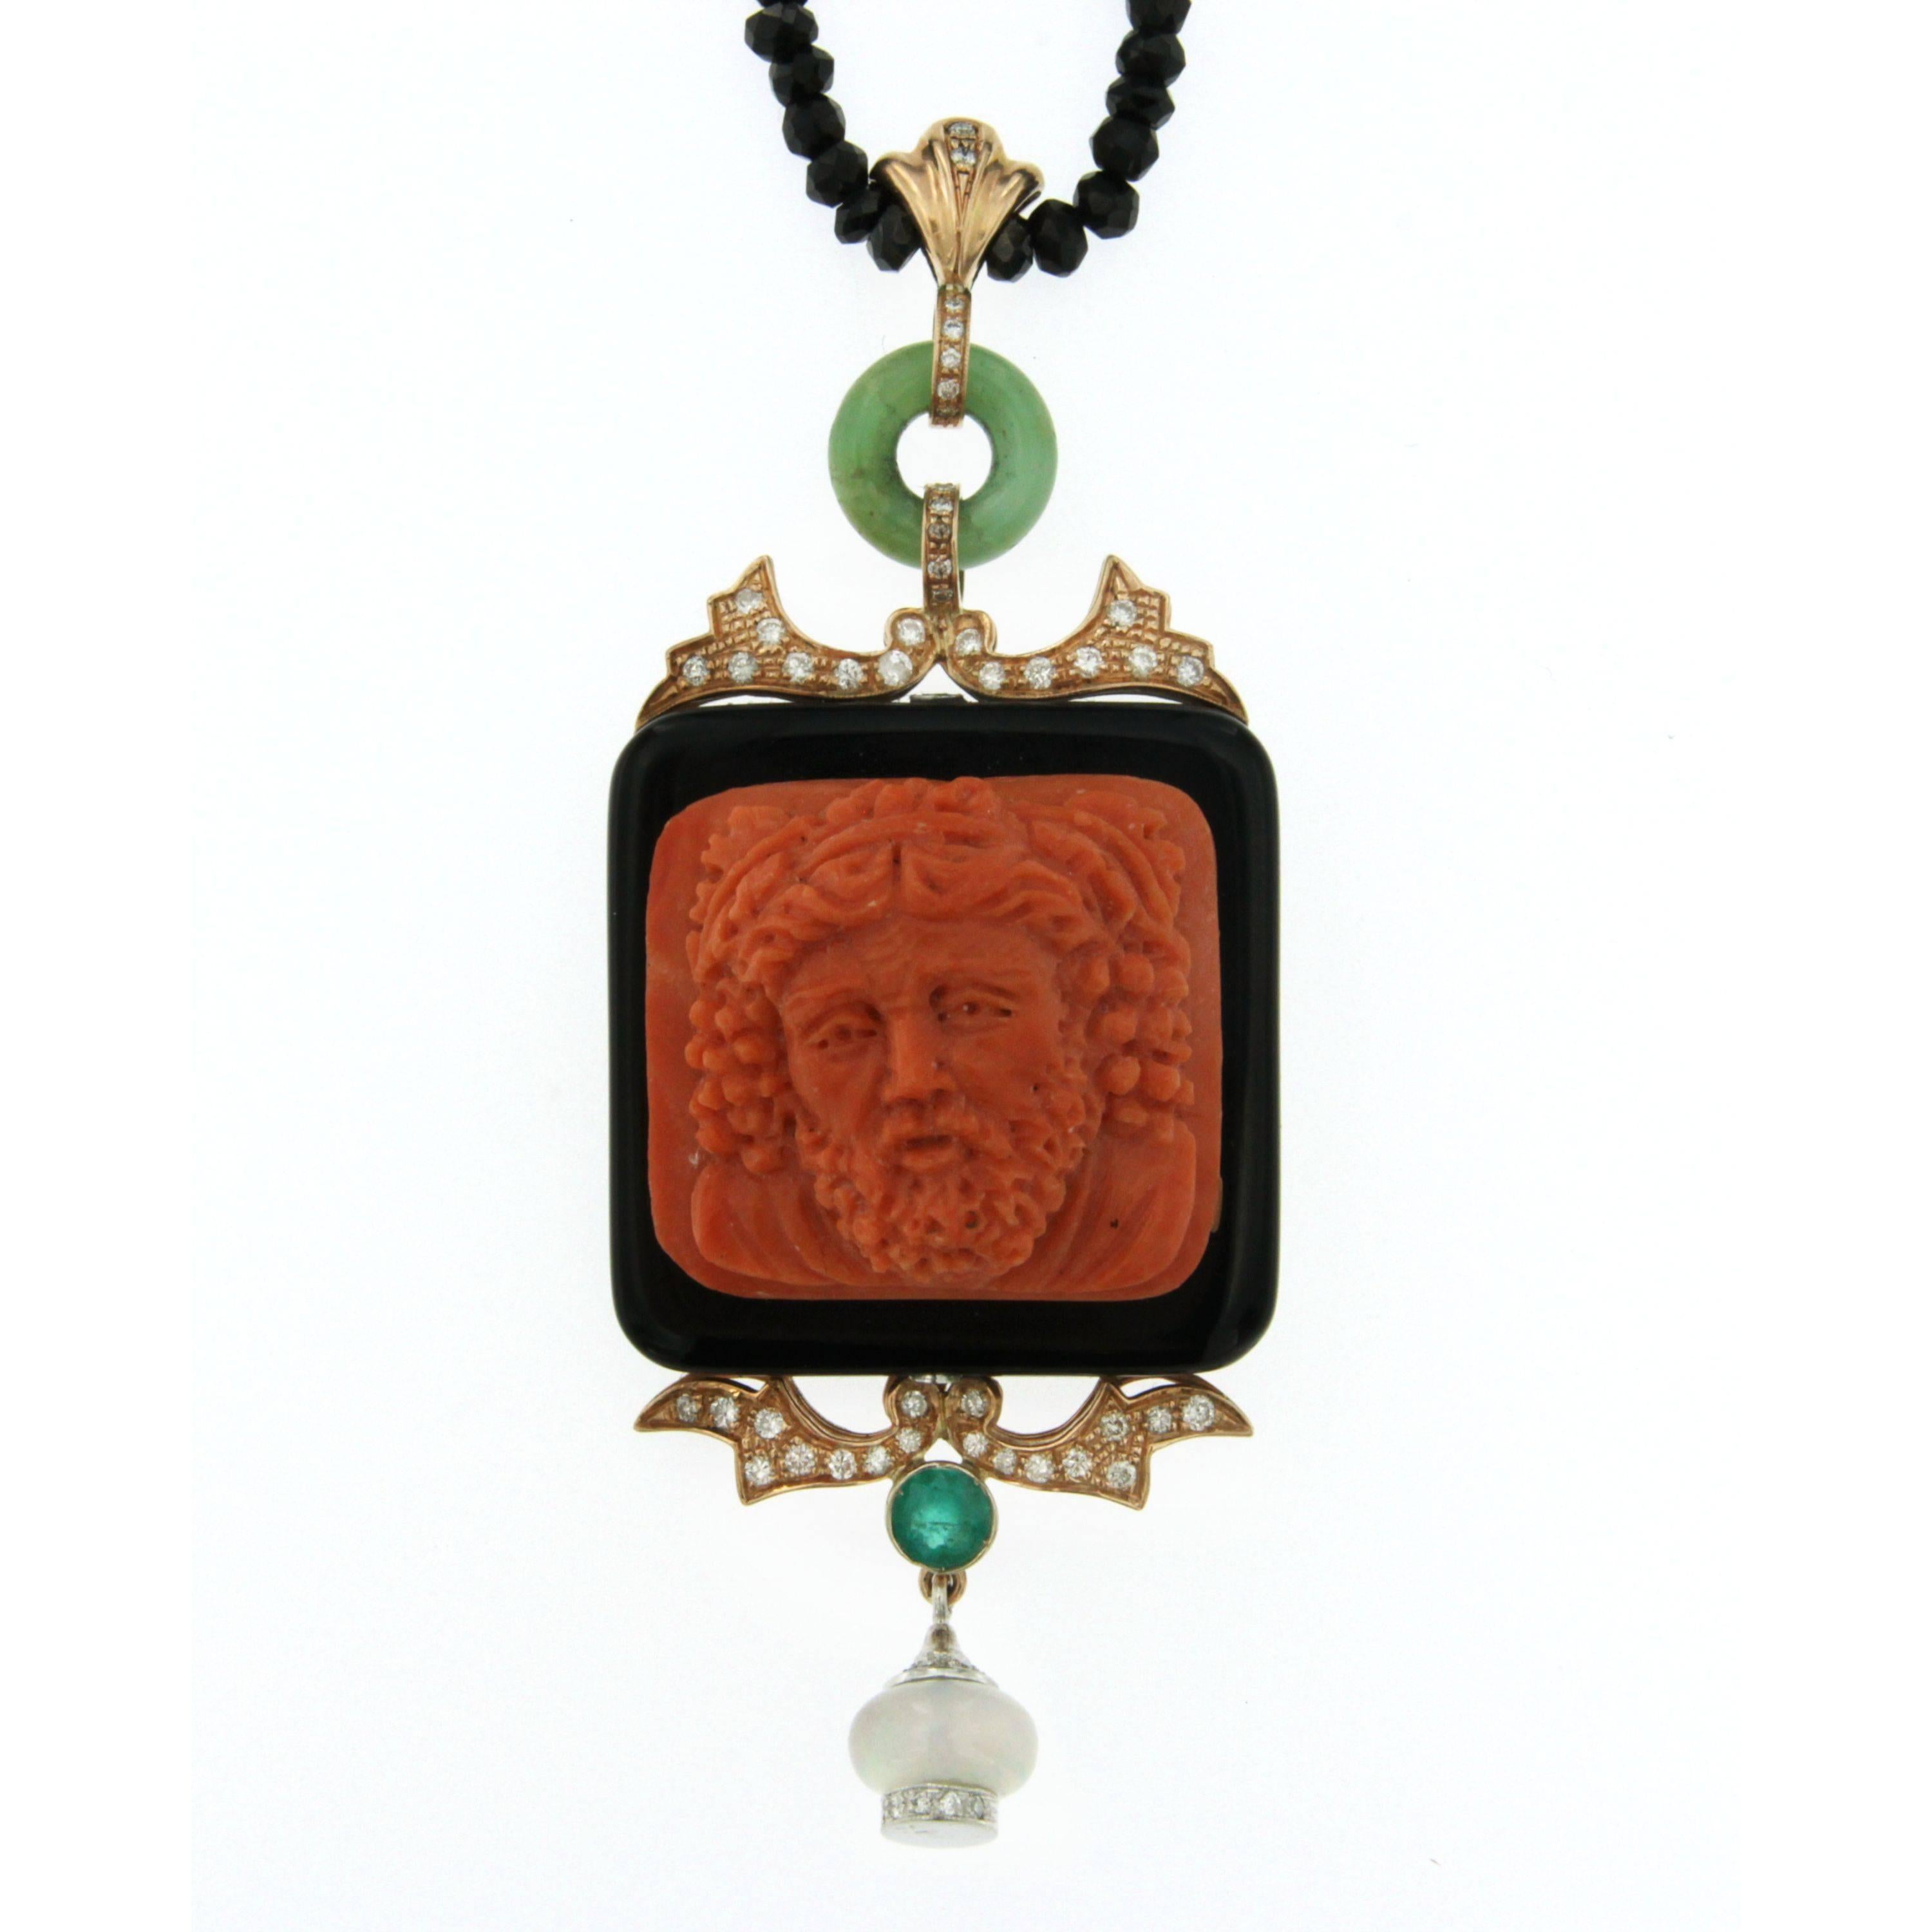 Pendant necklace in 14kt rose gold. It is composed of Mediterranean Coral carved classical male face surrounded by an onyx frame and embellished with diamonds, emerald and jade. Onyx chain 44 cm long (17.32 inches)
The craftmanship on this pendant